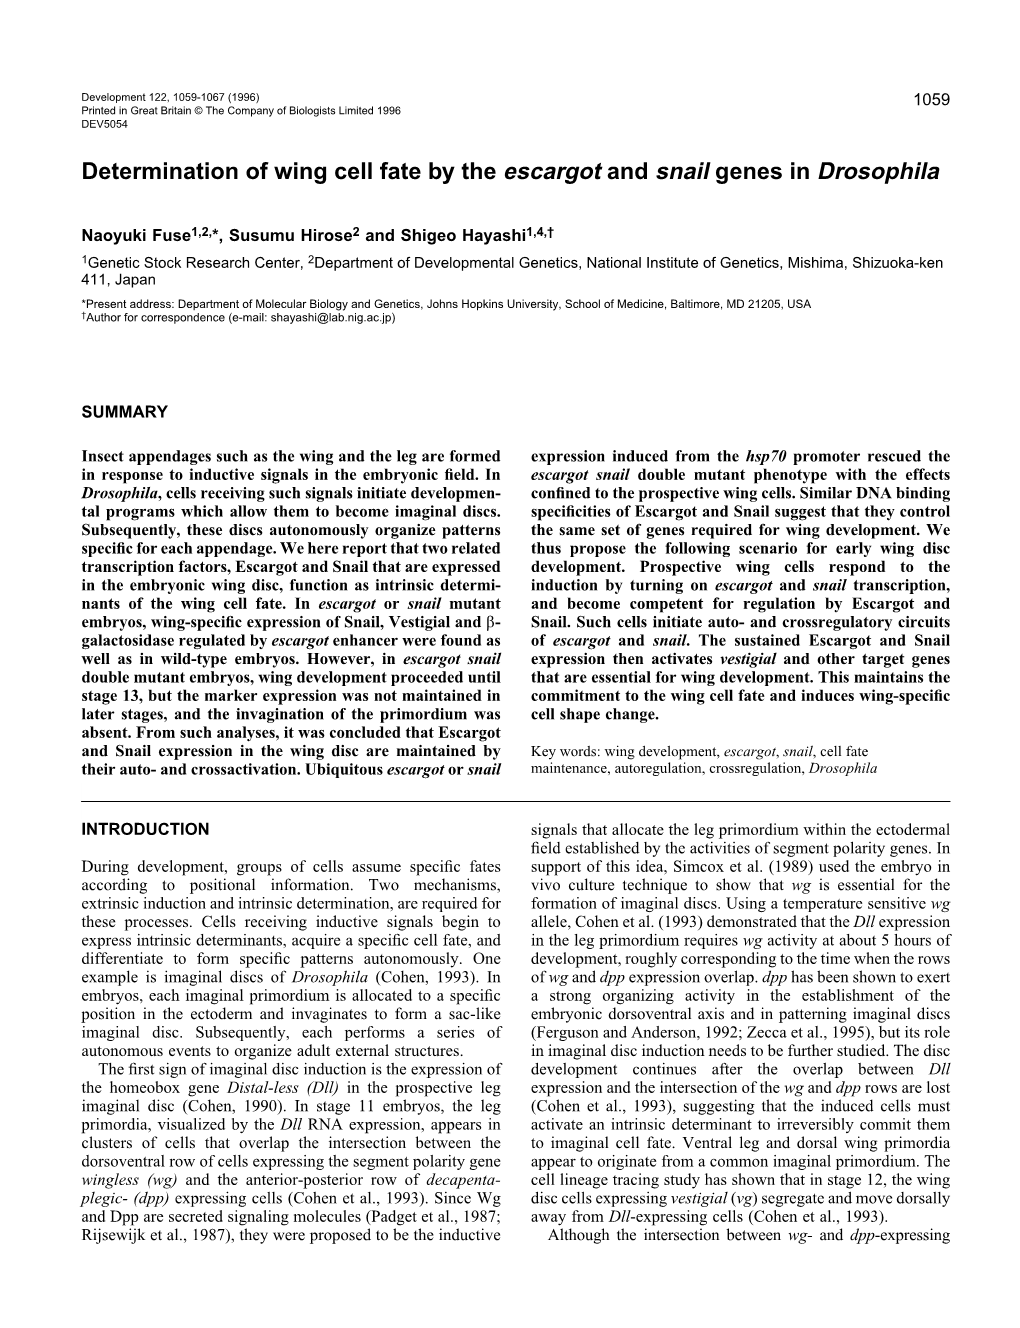 Determination of Wing Cell Fate by the Escargot and Snail Genes in Drosophila